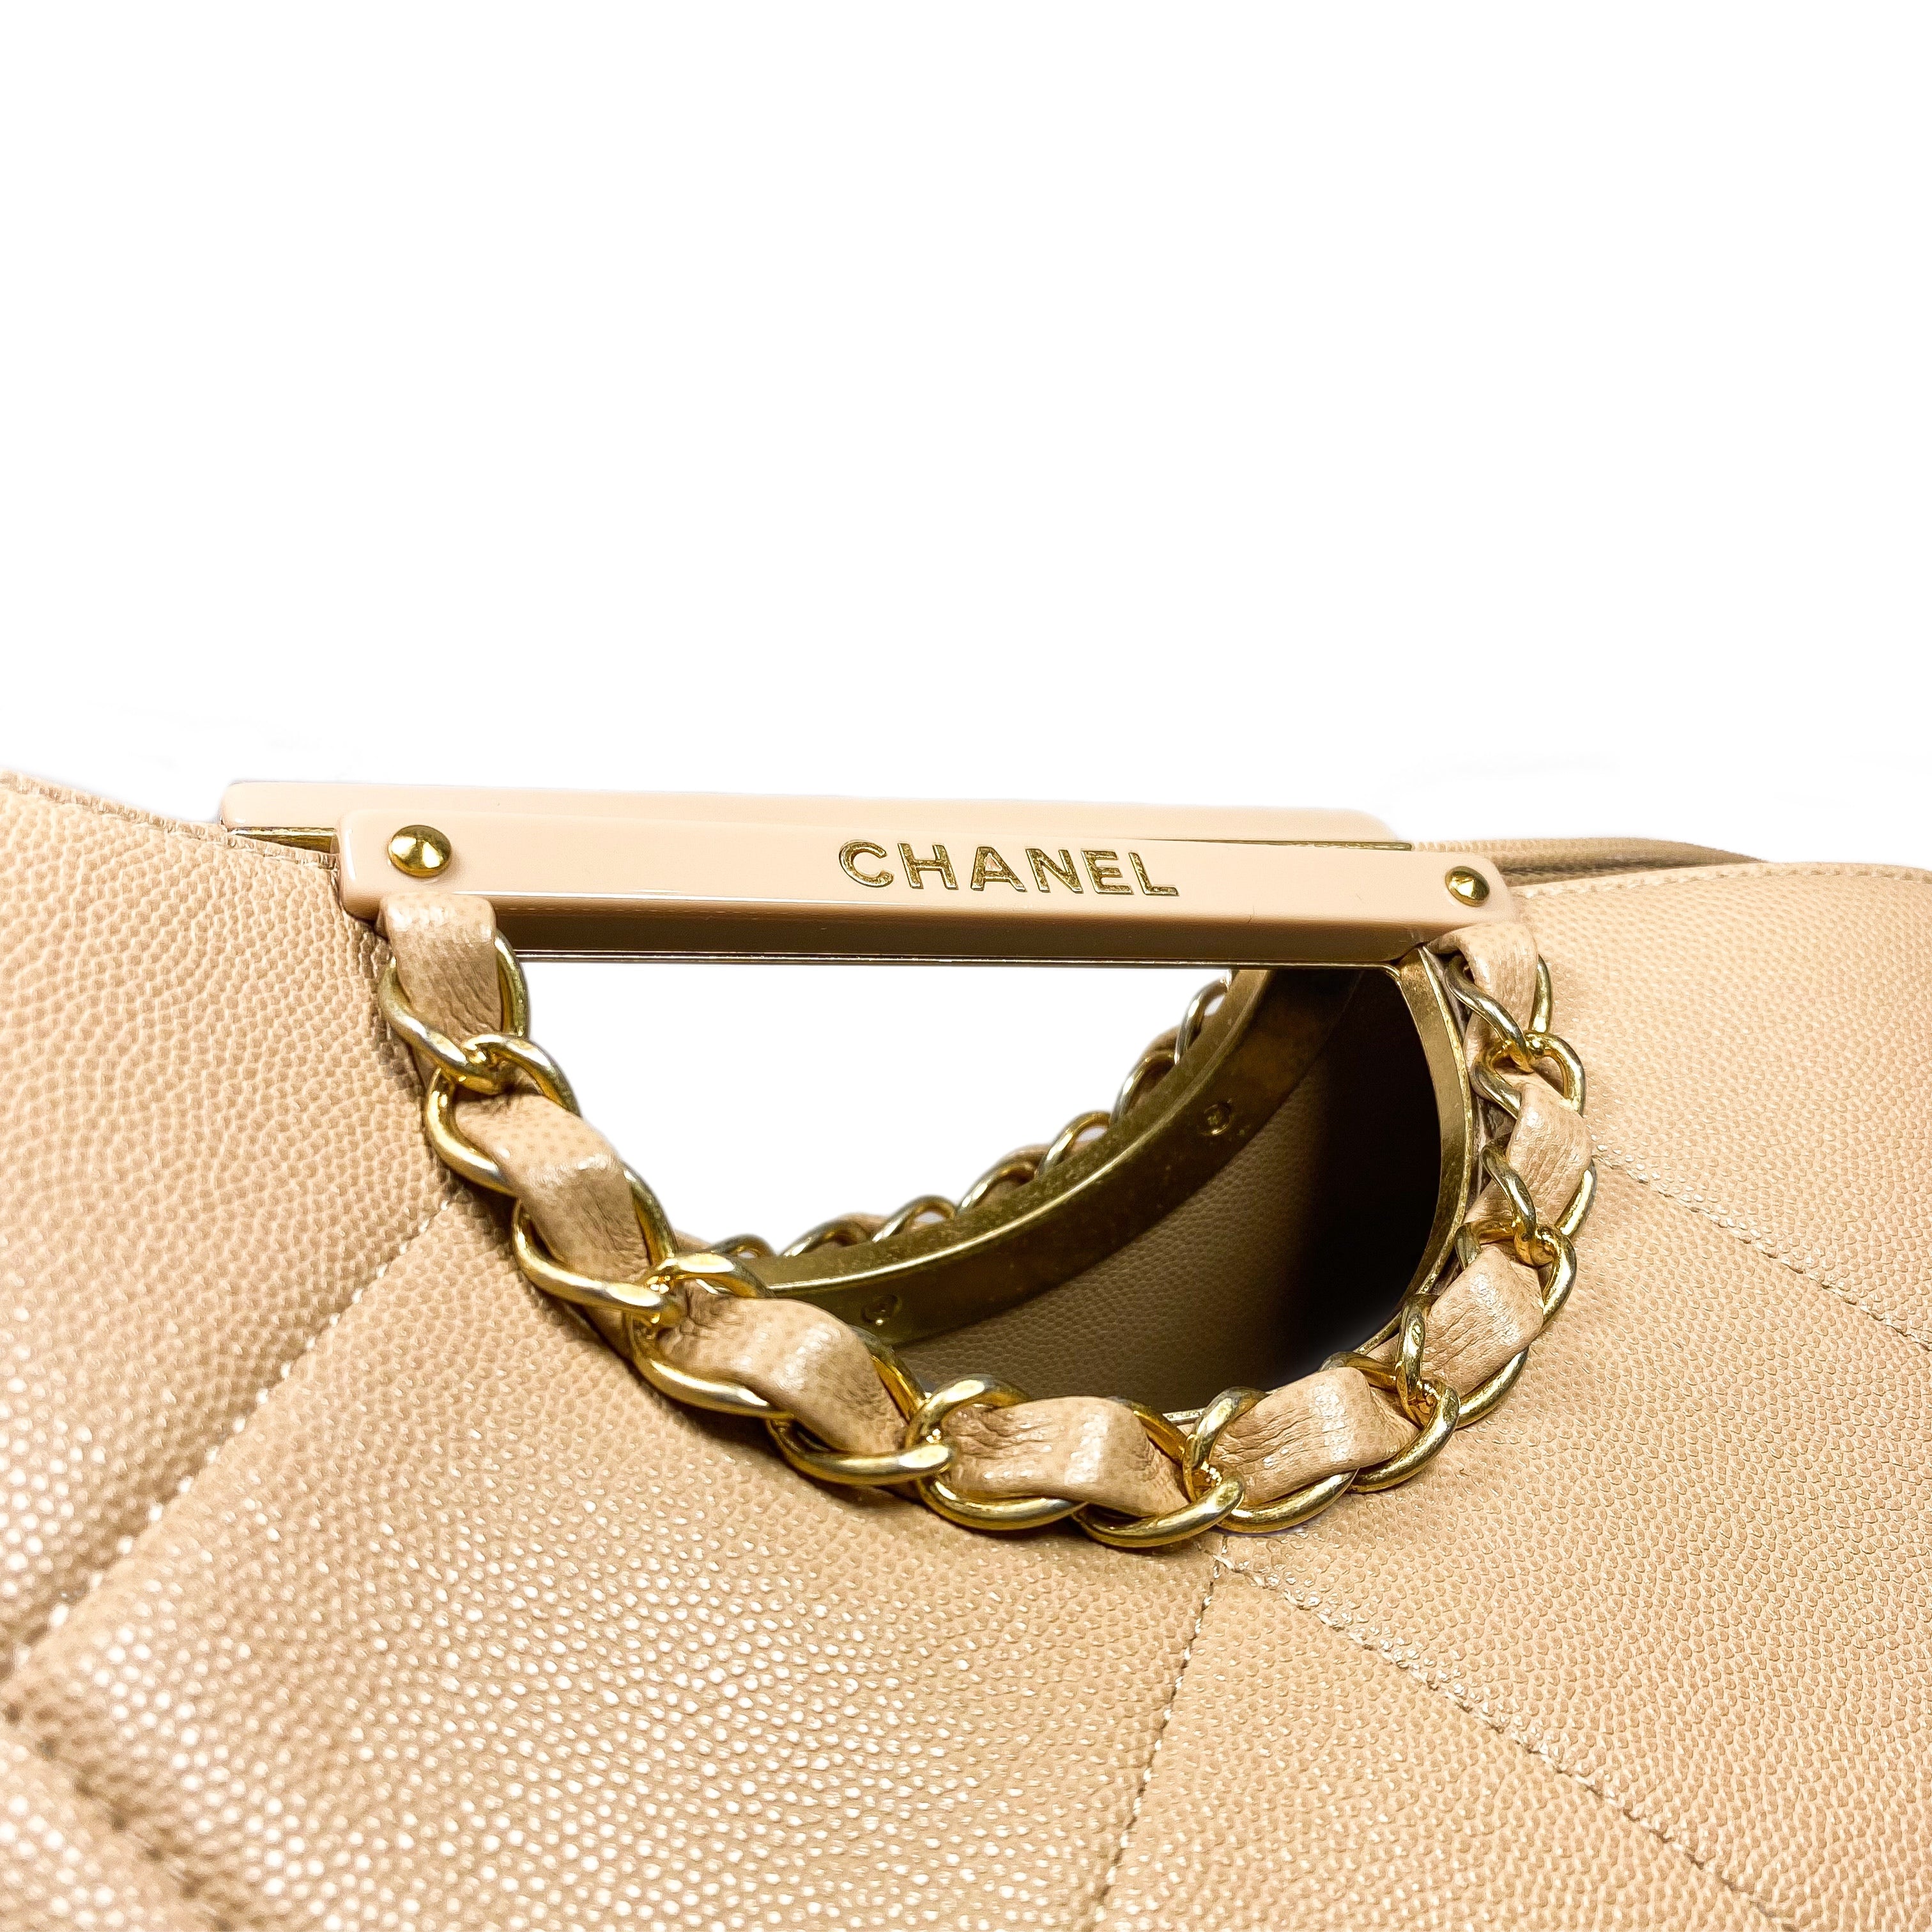 Chanel Beige Quilted Caviar Chain Frame Shopping Tote